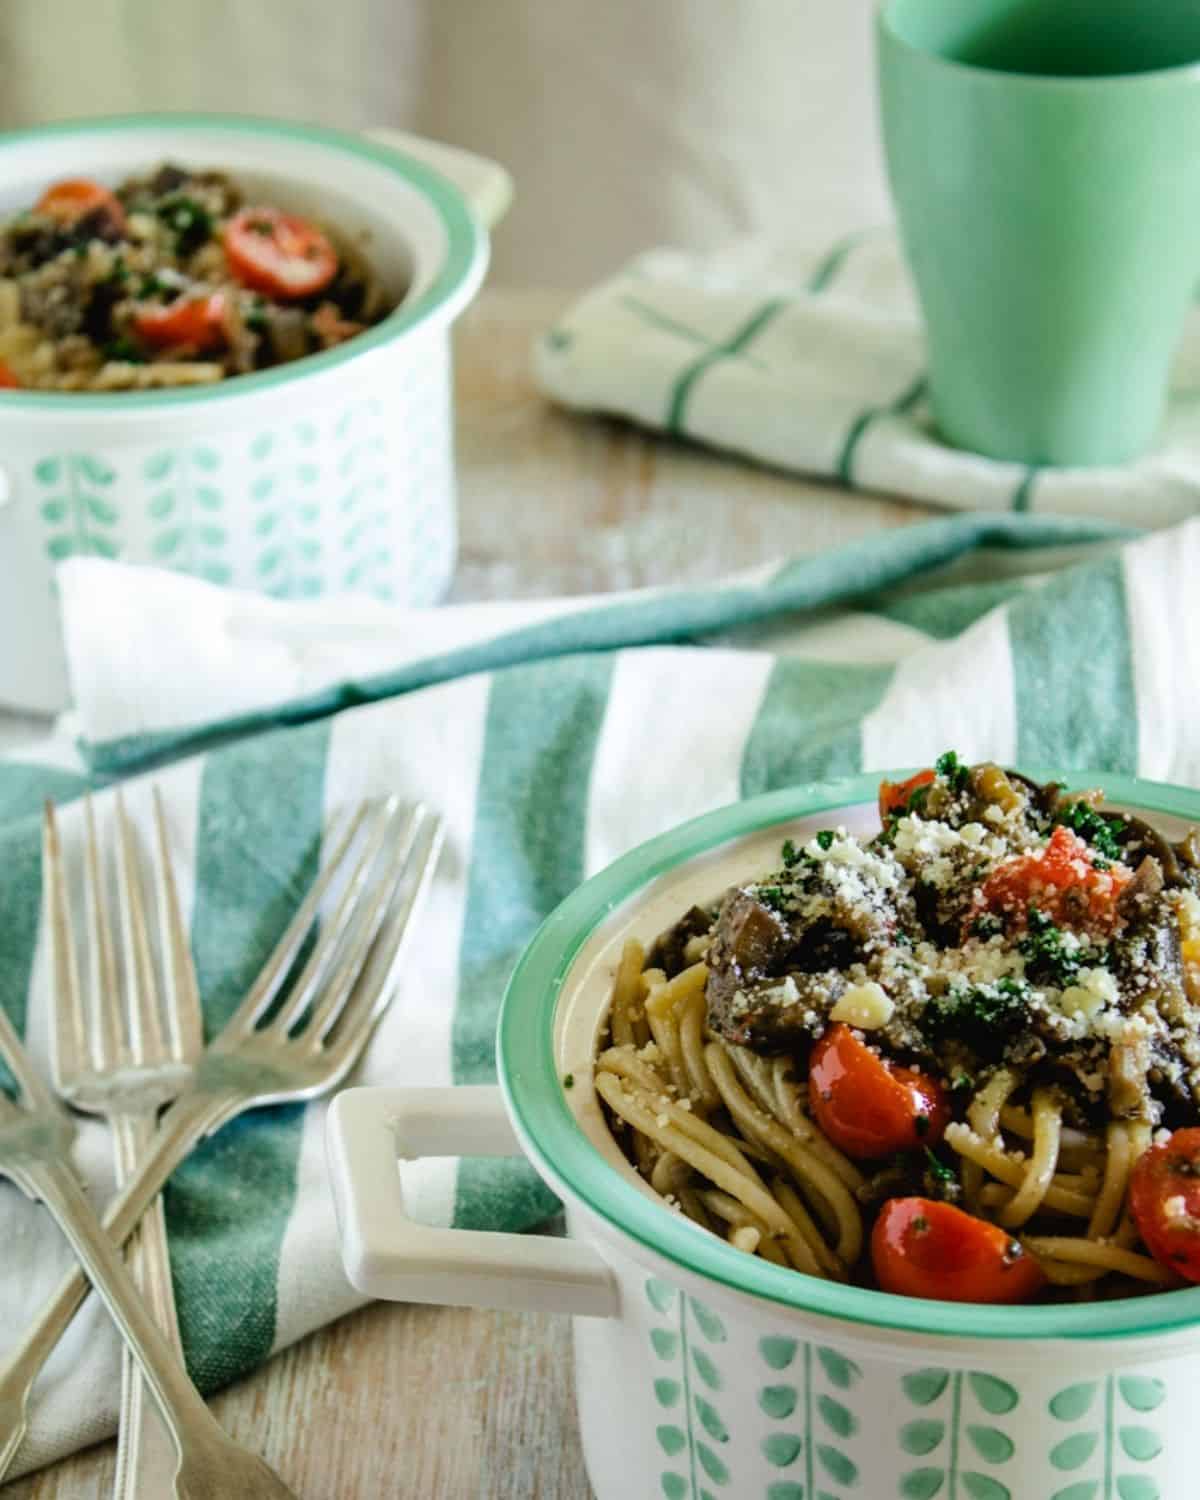 Two bowls of Eggplants Spaghetti with Anchovies on a white wooden table with a white and green linen. There are two forks and a green mug